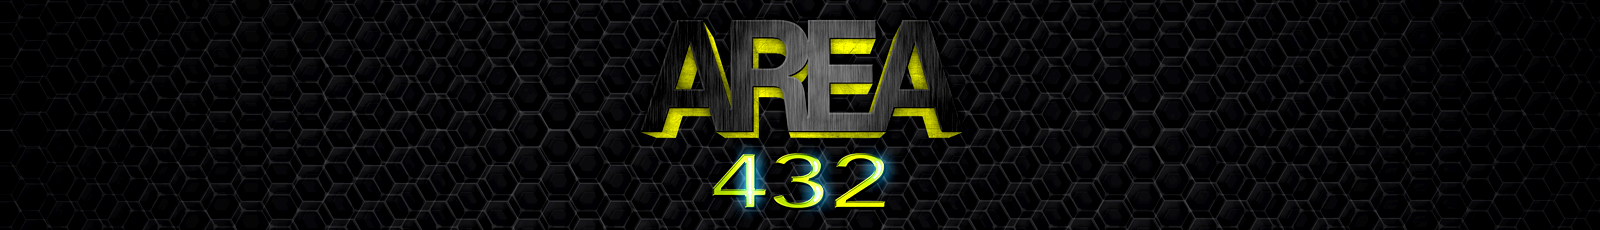 Area432Banner.png